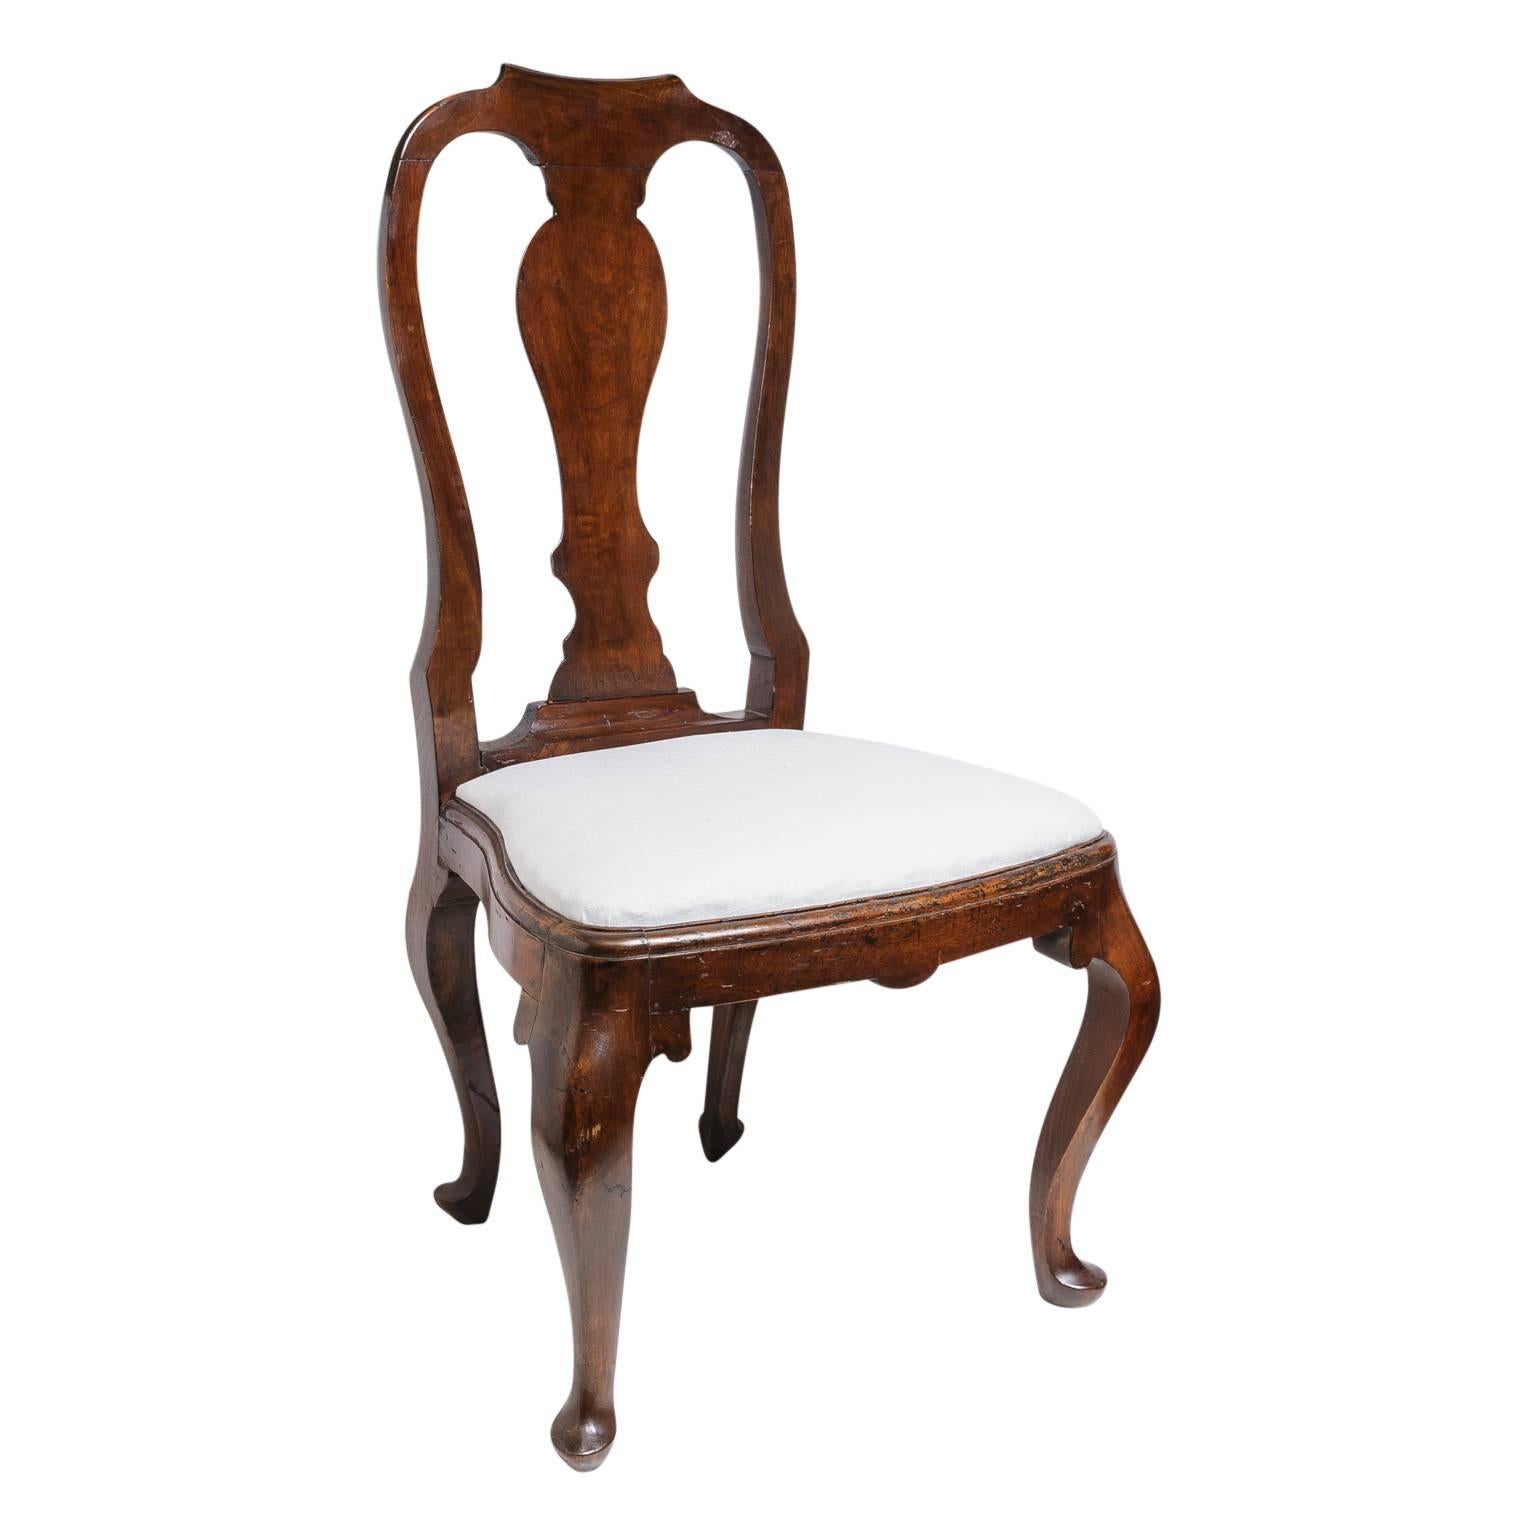 This set of four Queen Anne revival dining side chairs date from the mid to late 19th century. The frames look to be in walnut and are hand-carved with cabriolet leg, serpentine back and serpentine shaped seat. The slip seat is easily removed to